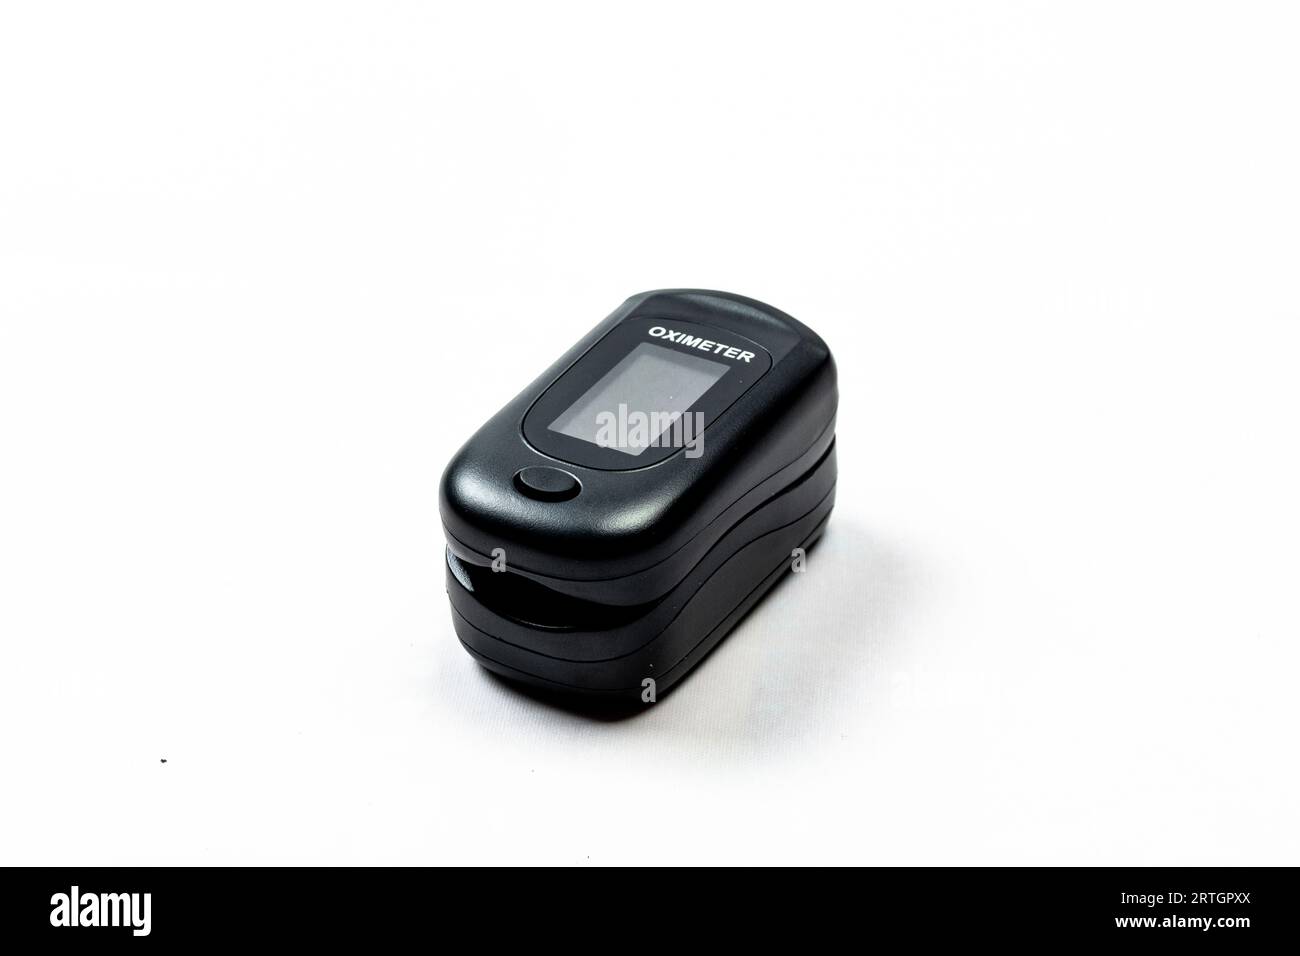 Digital pulse oximeter photographed on a white background in high key. Medical instruments. Stock Photo